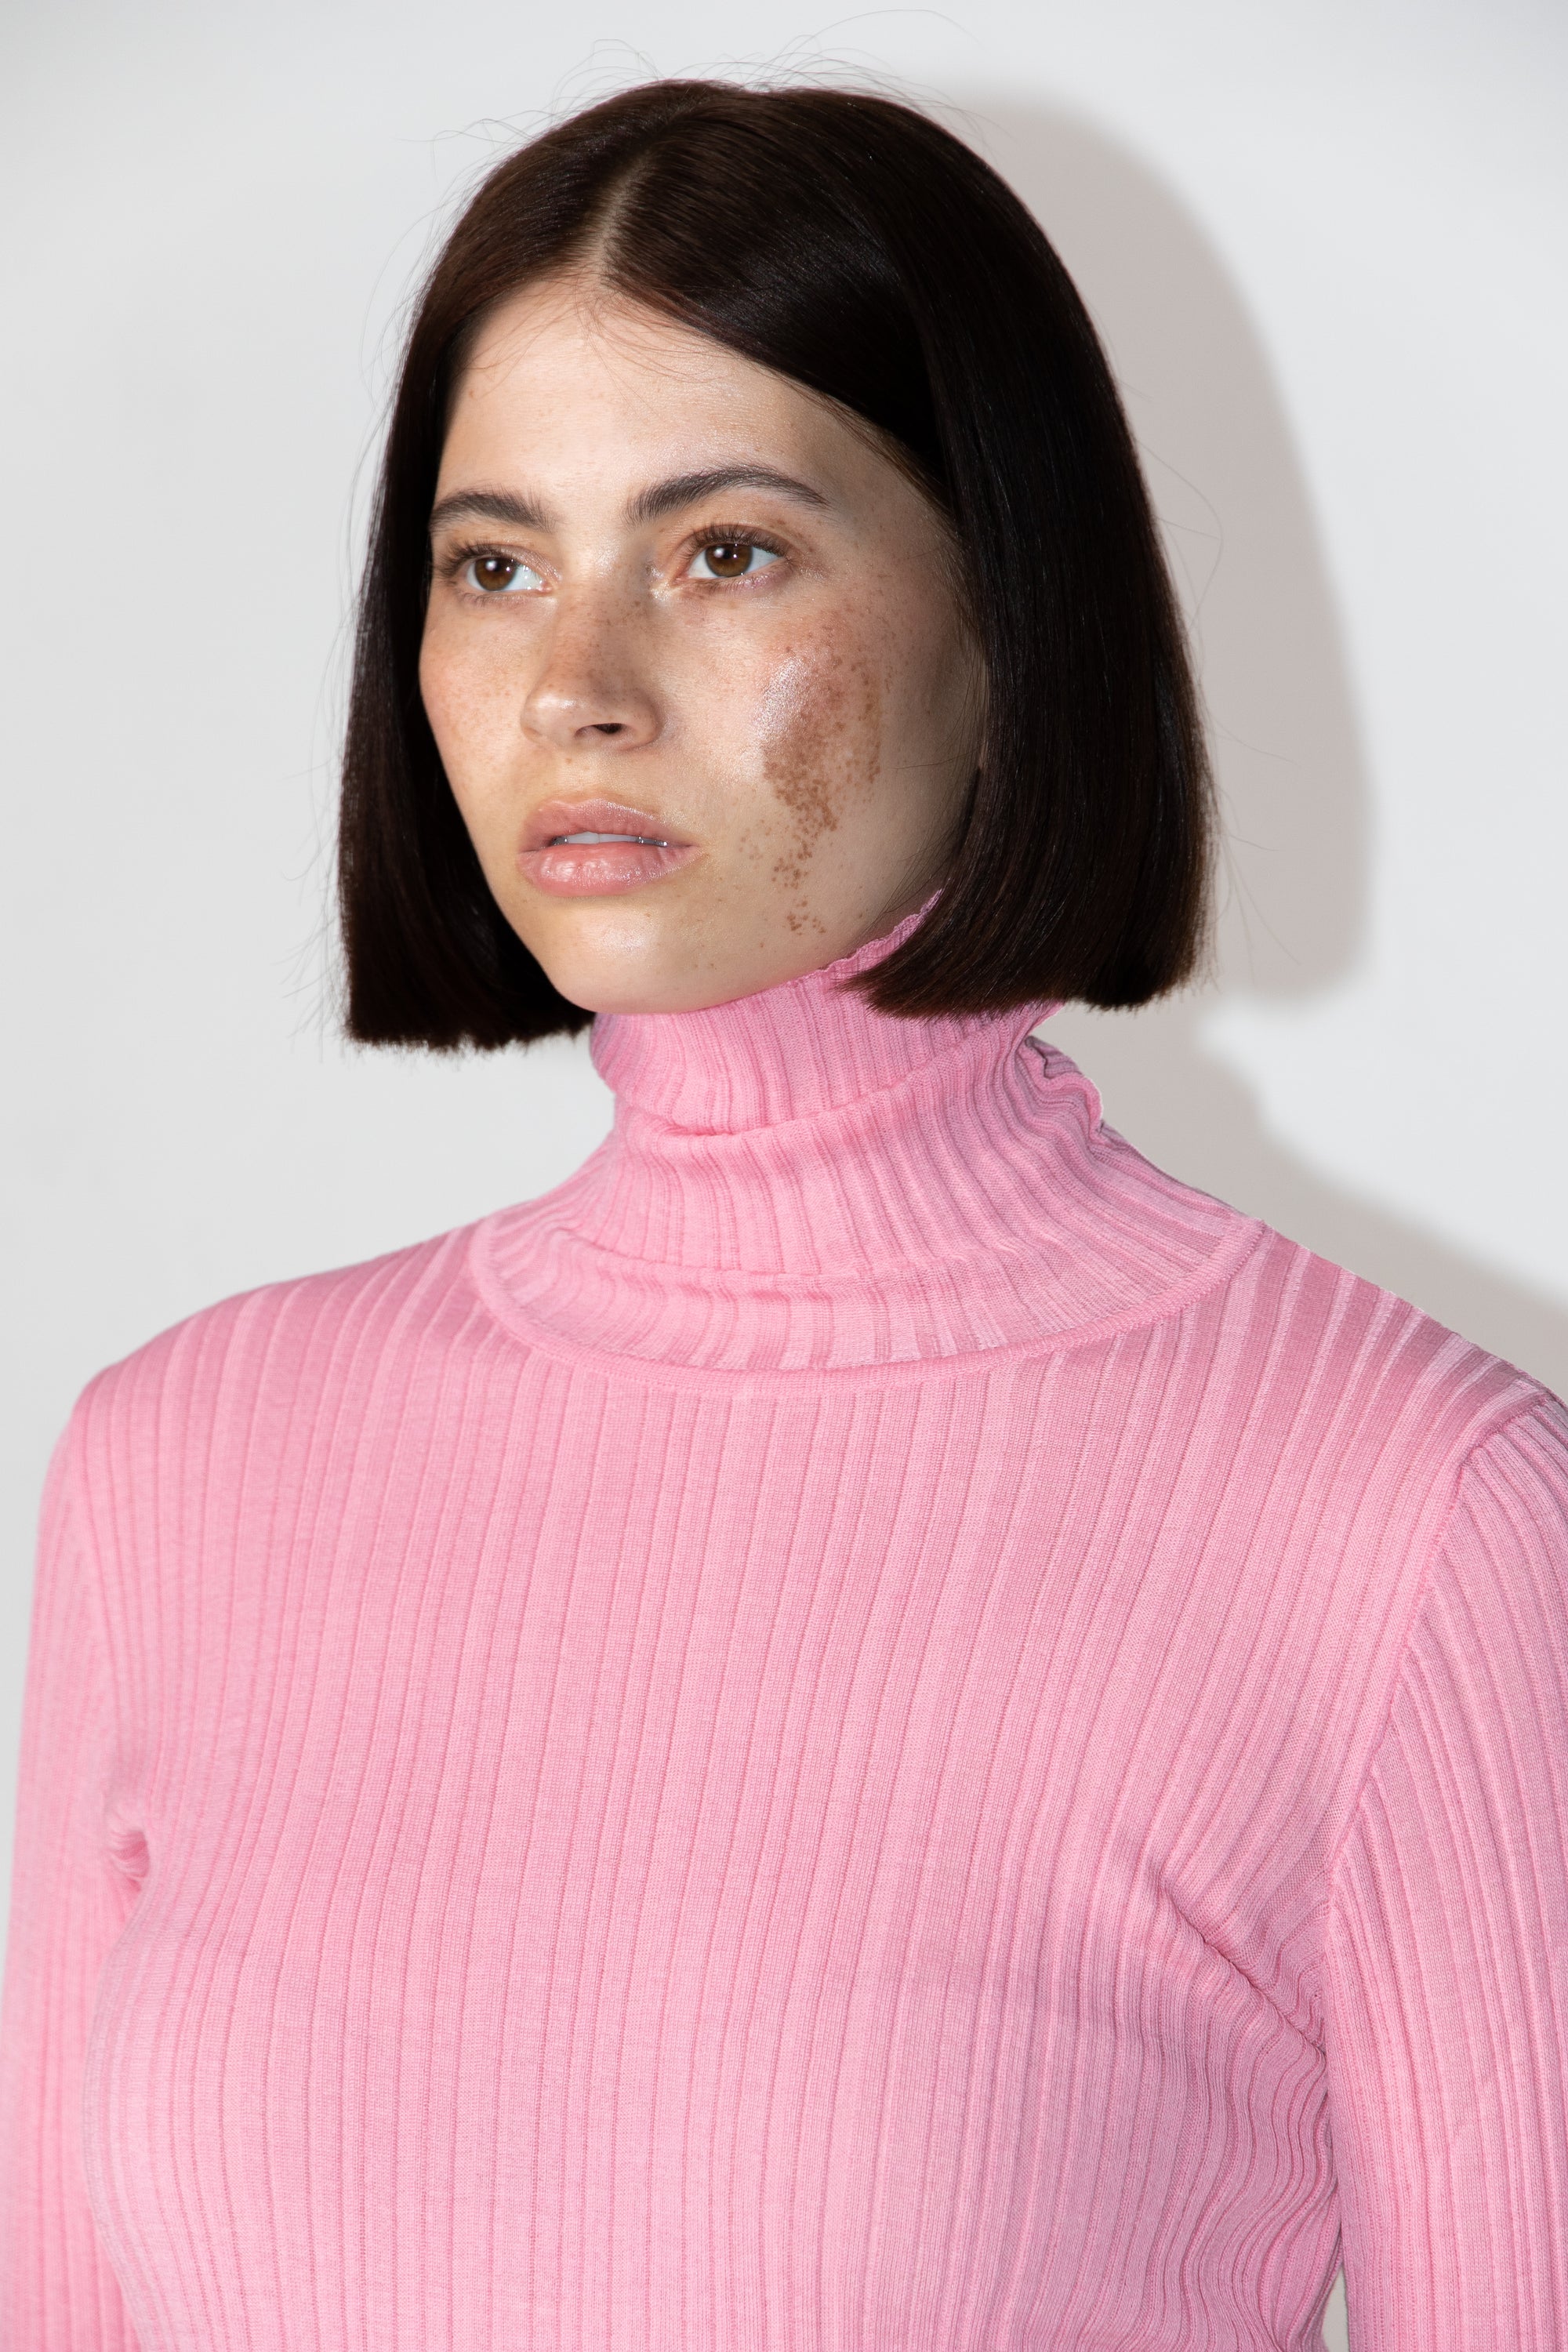 Ribbed Roll Neck. Pink